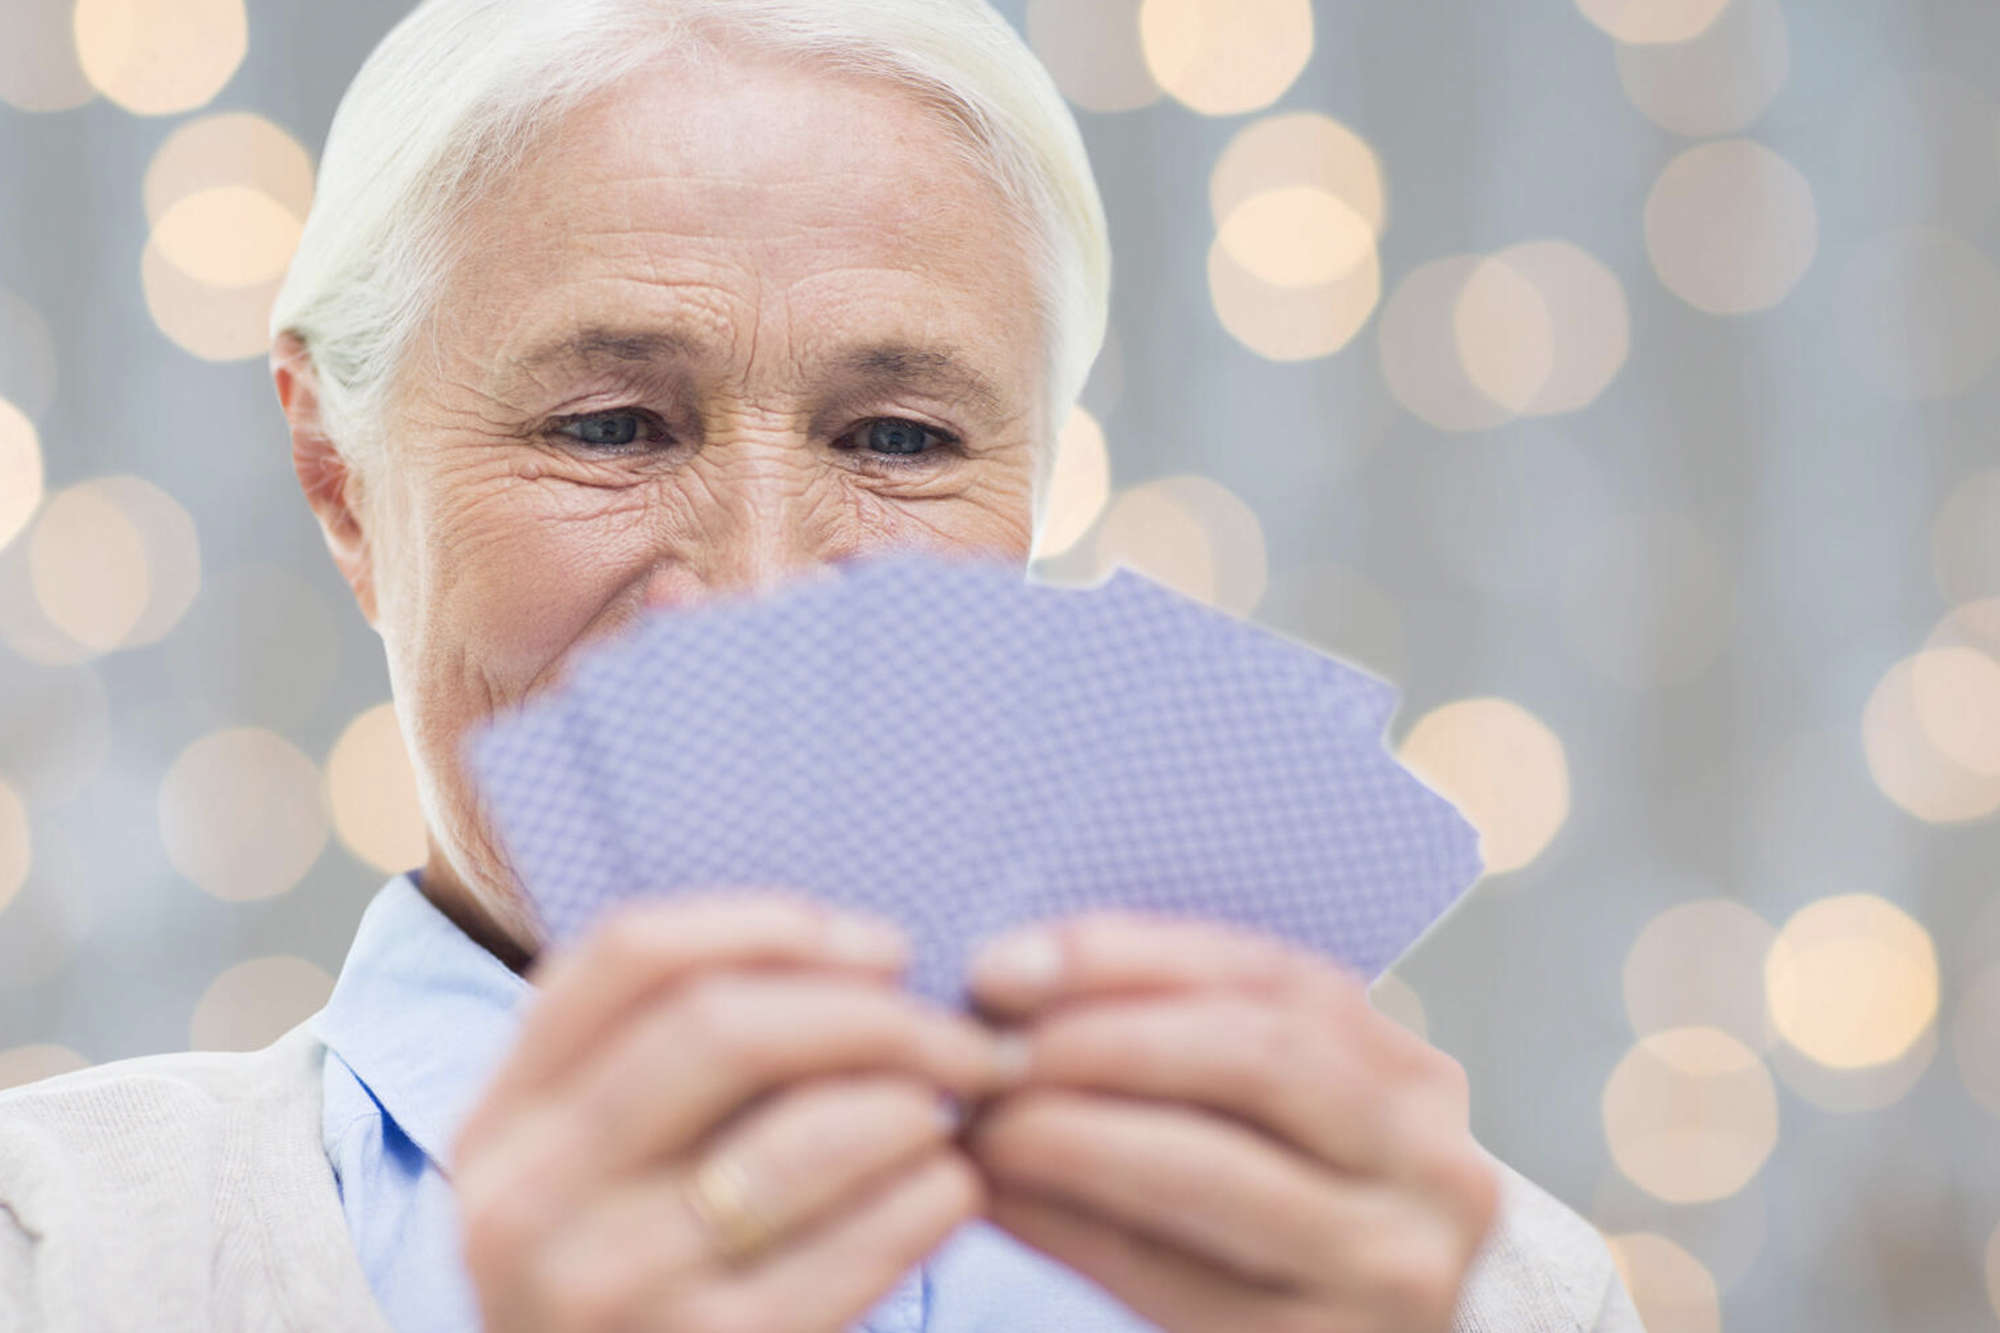 Fun Games to Play During Your Holiday Visit With Your Senior Loved One